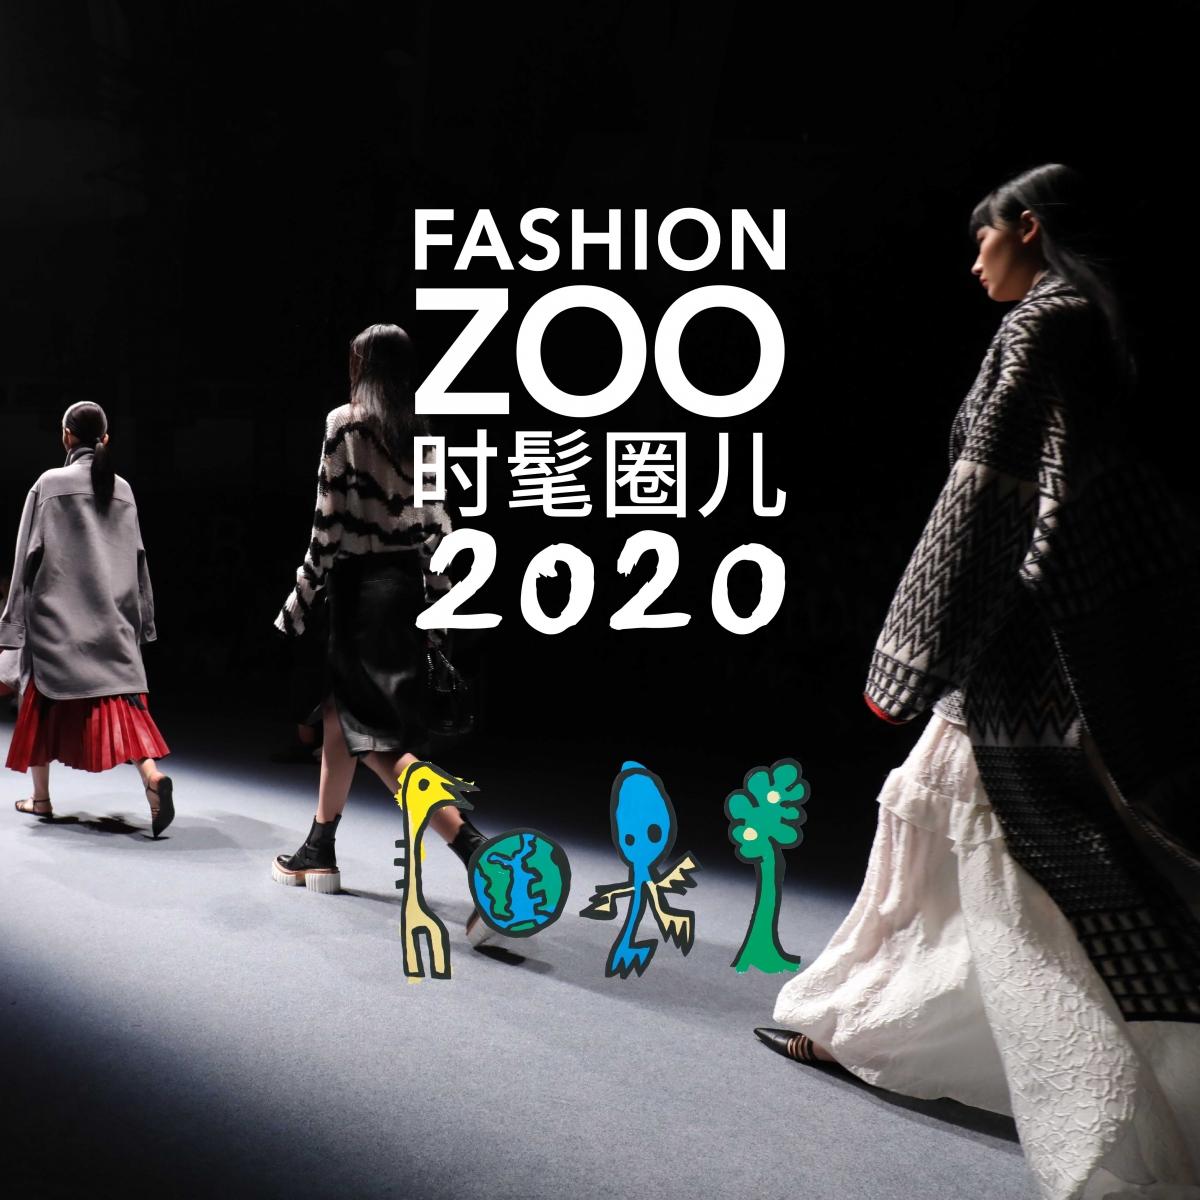 Sustainable Development in the Fashion Industry, presented by FASHION ZOO